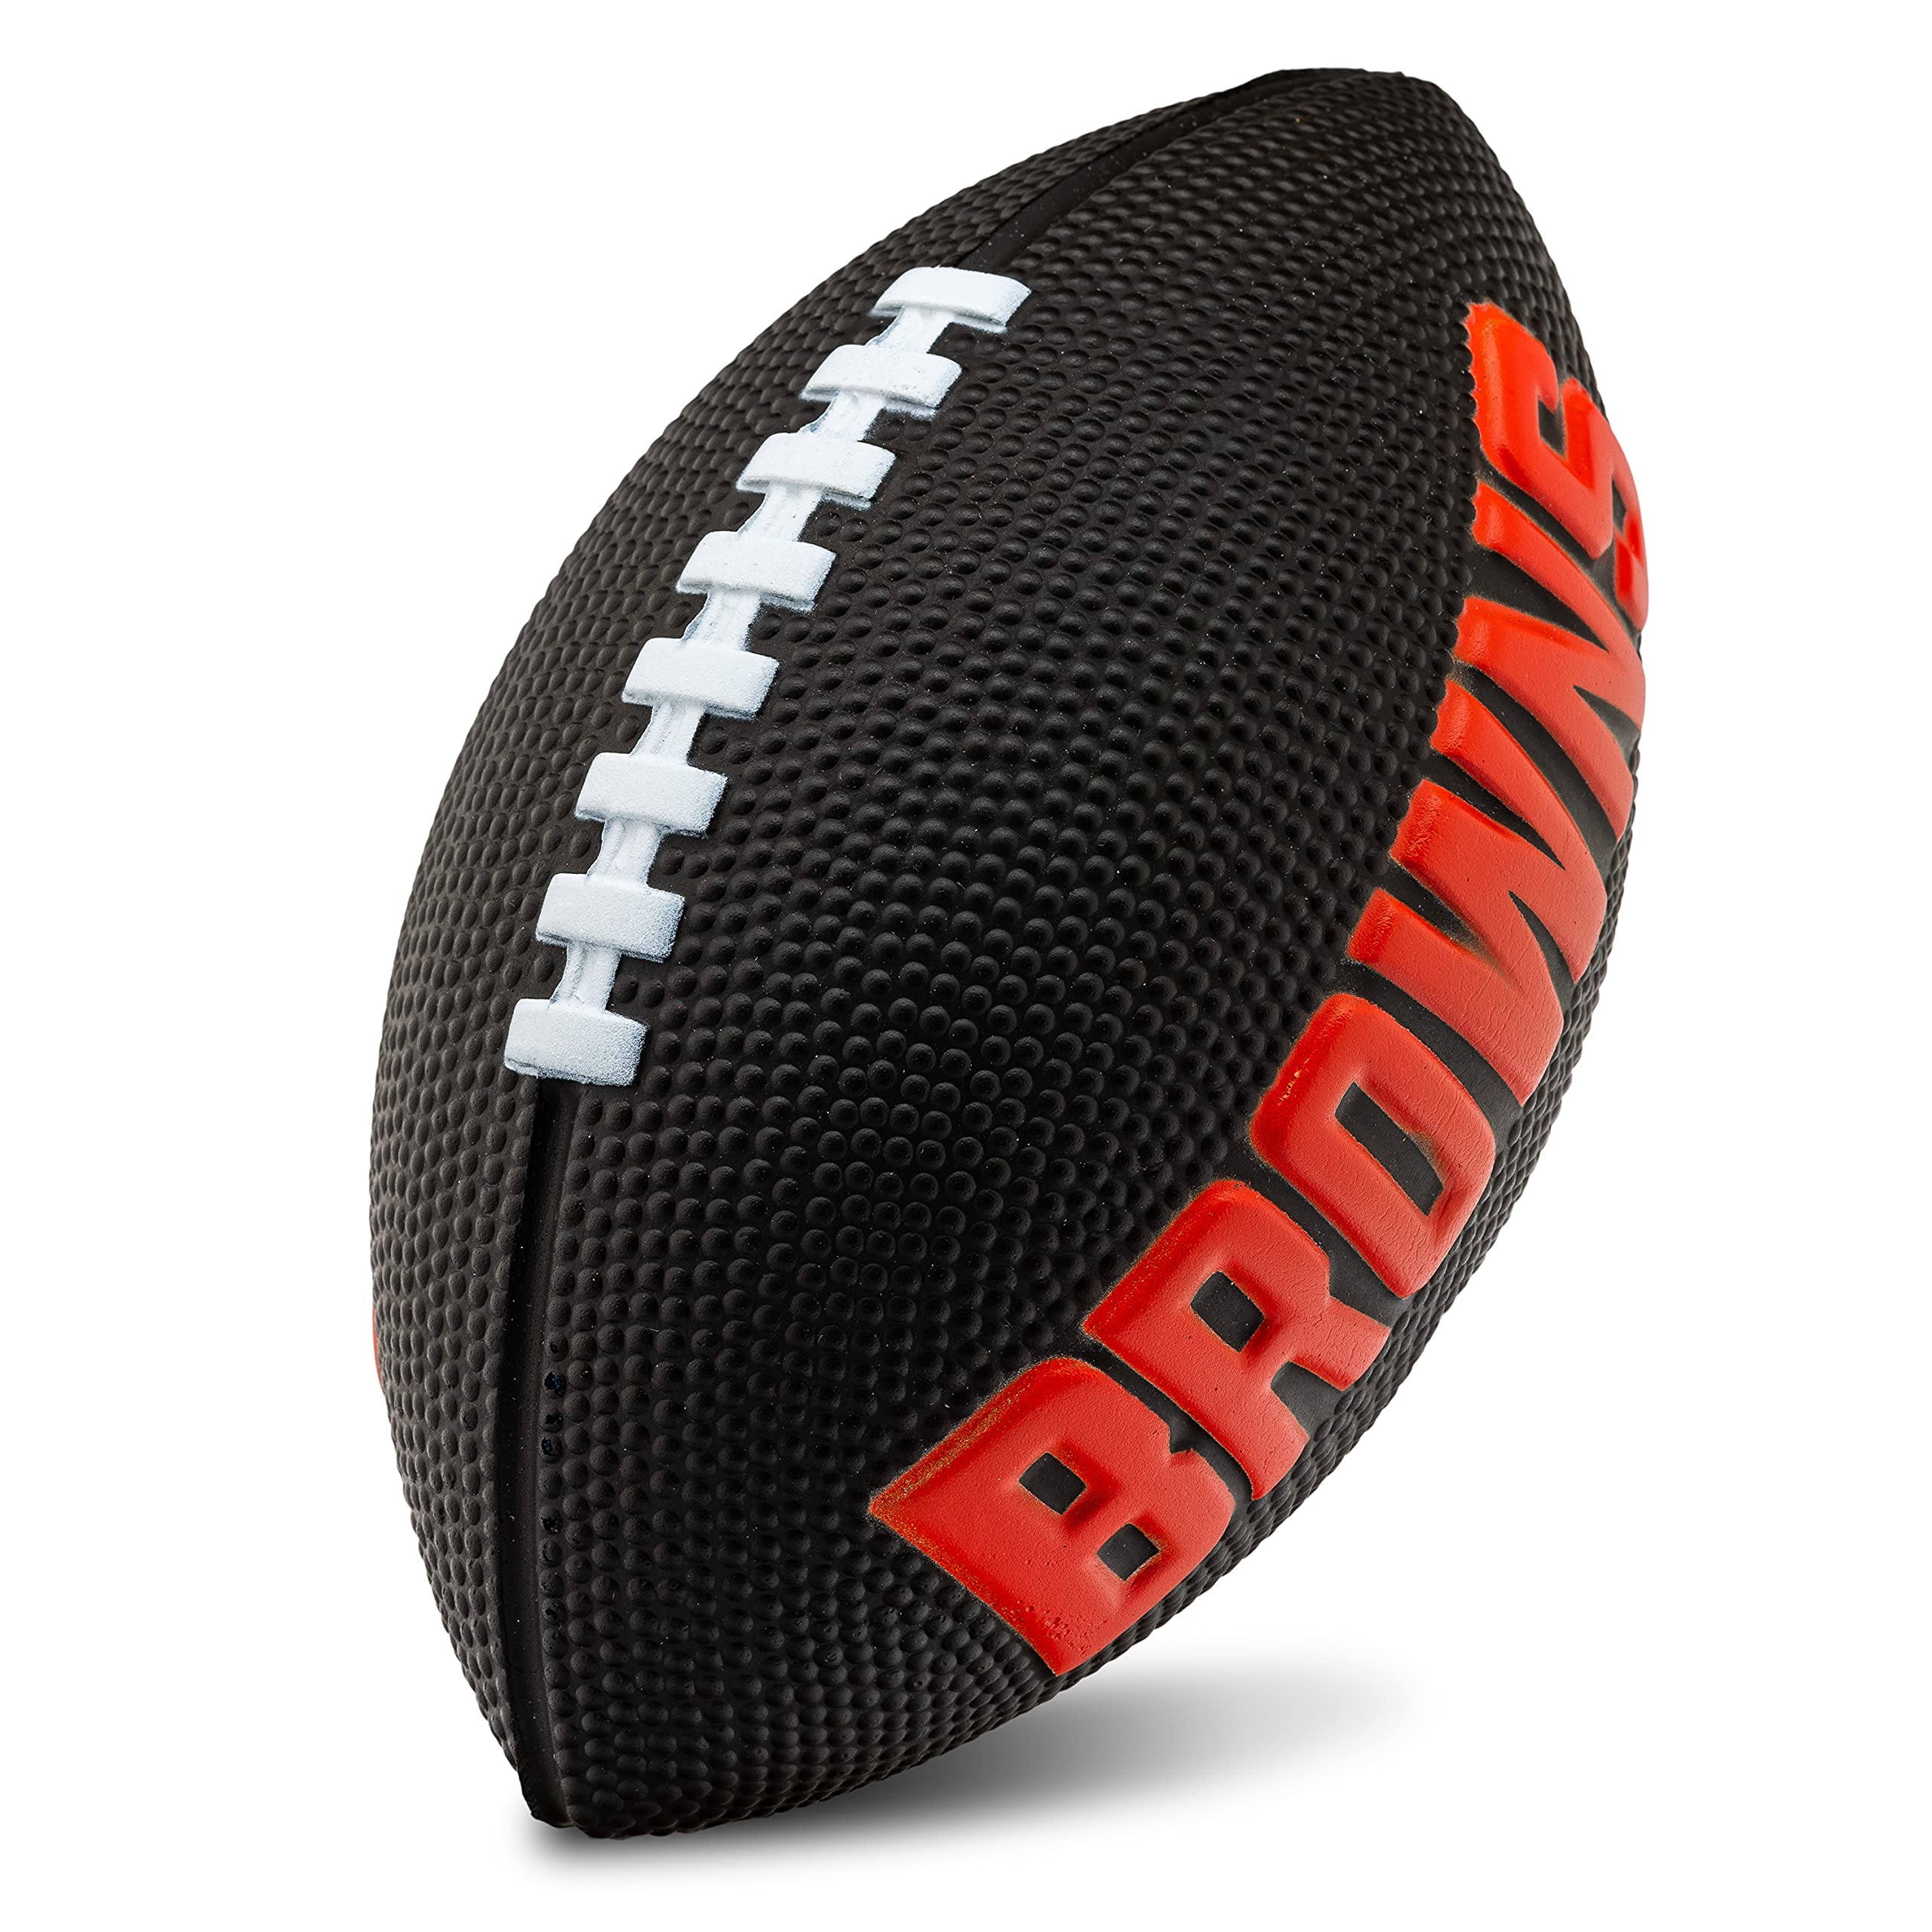 Franklin Sports Nfl Cleveland Browns Football - Kids Foam Football - Soft Football - Mini Size - Perfect For Gameday - 85 3D Log